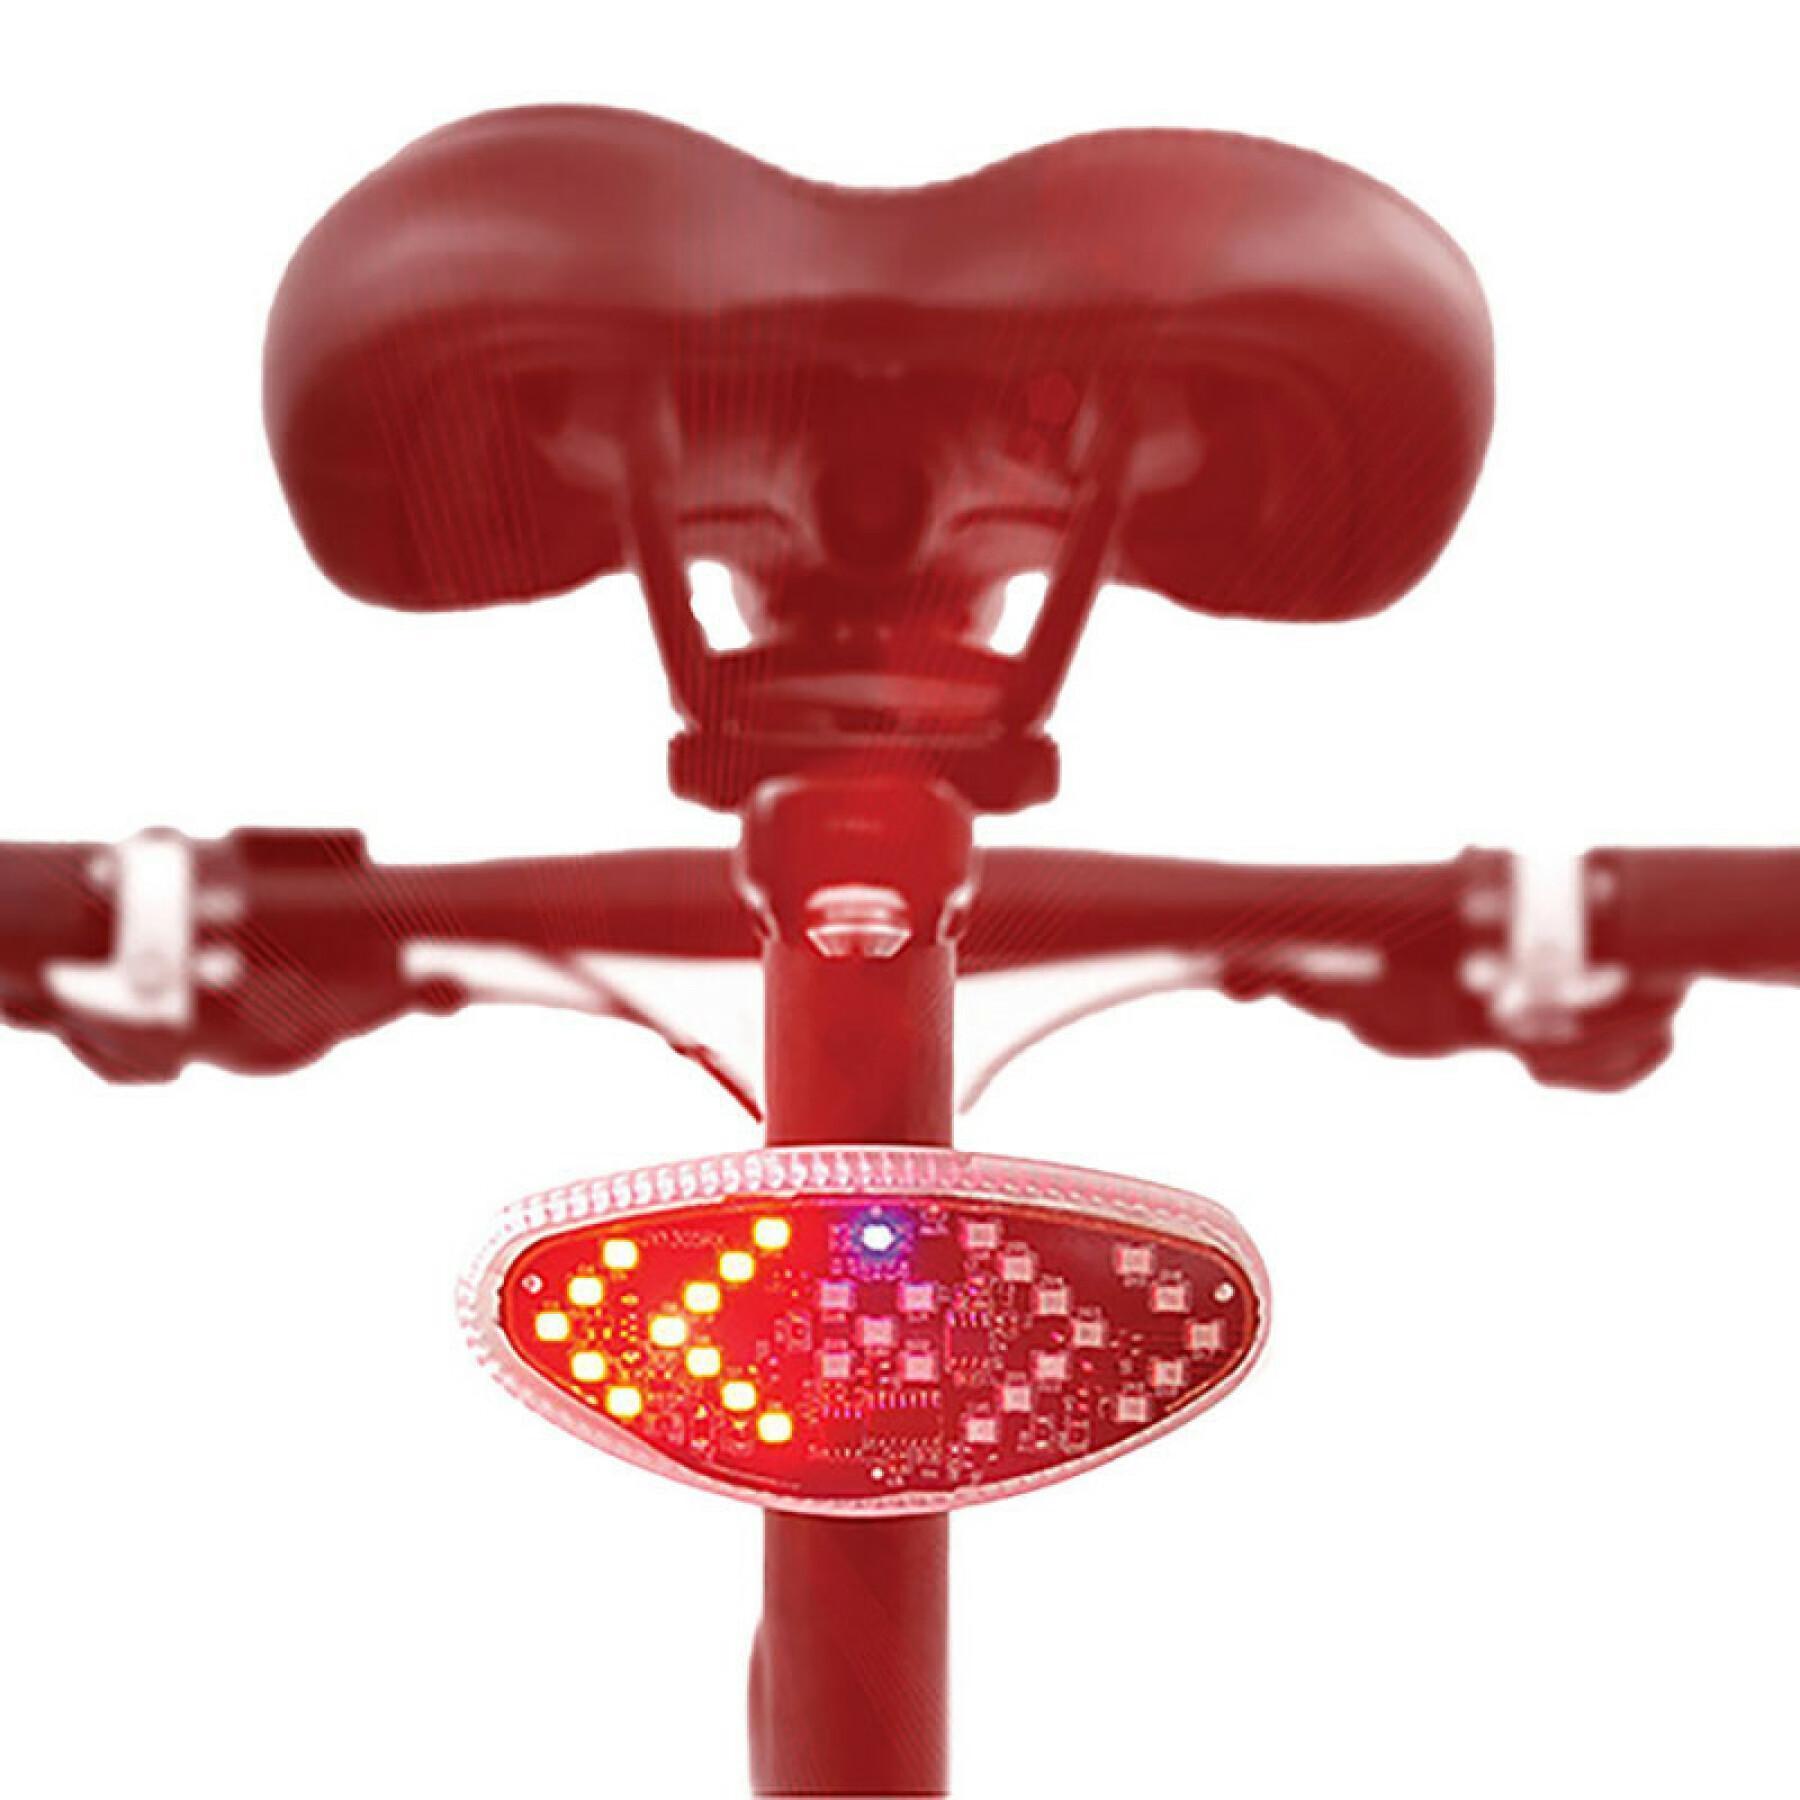 Multi-purpose flashing light with usb rechargeable attachment CoolRide